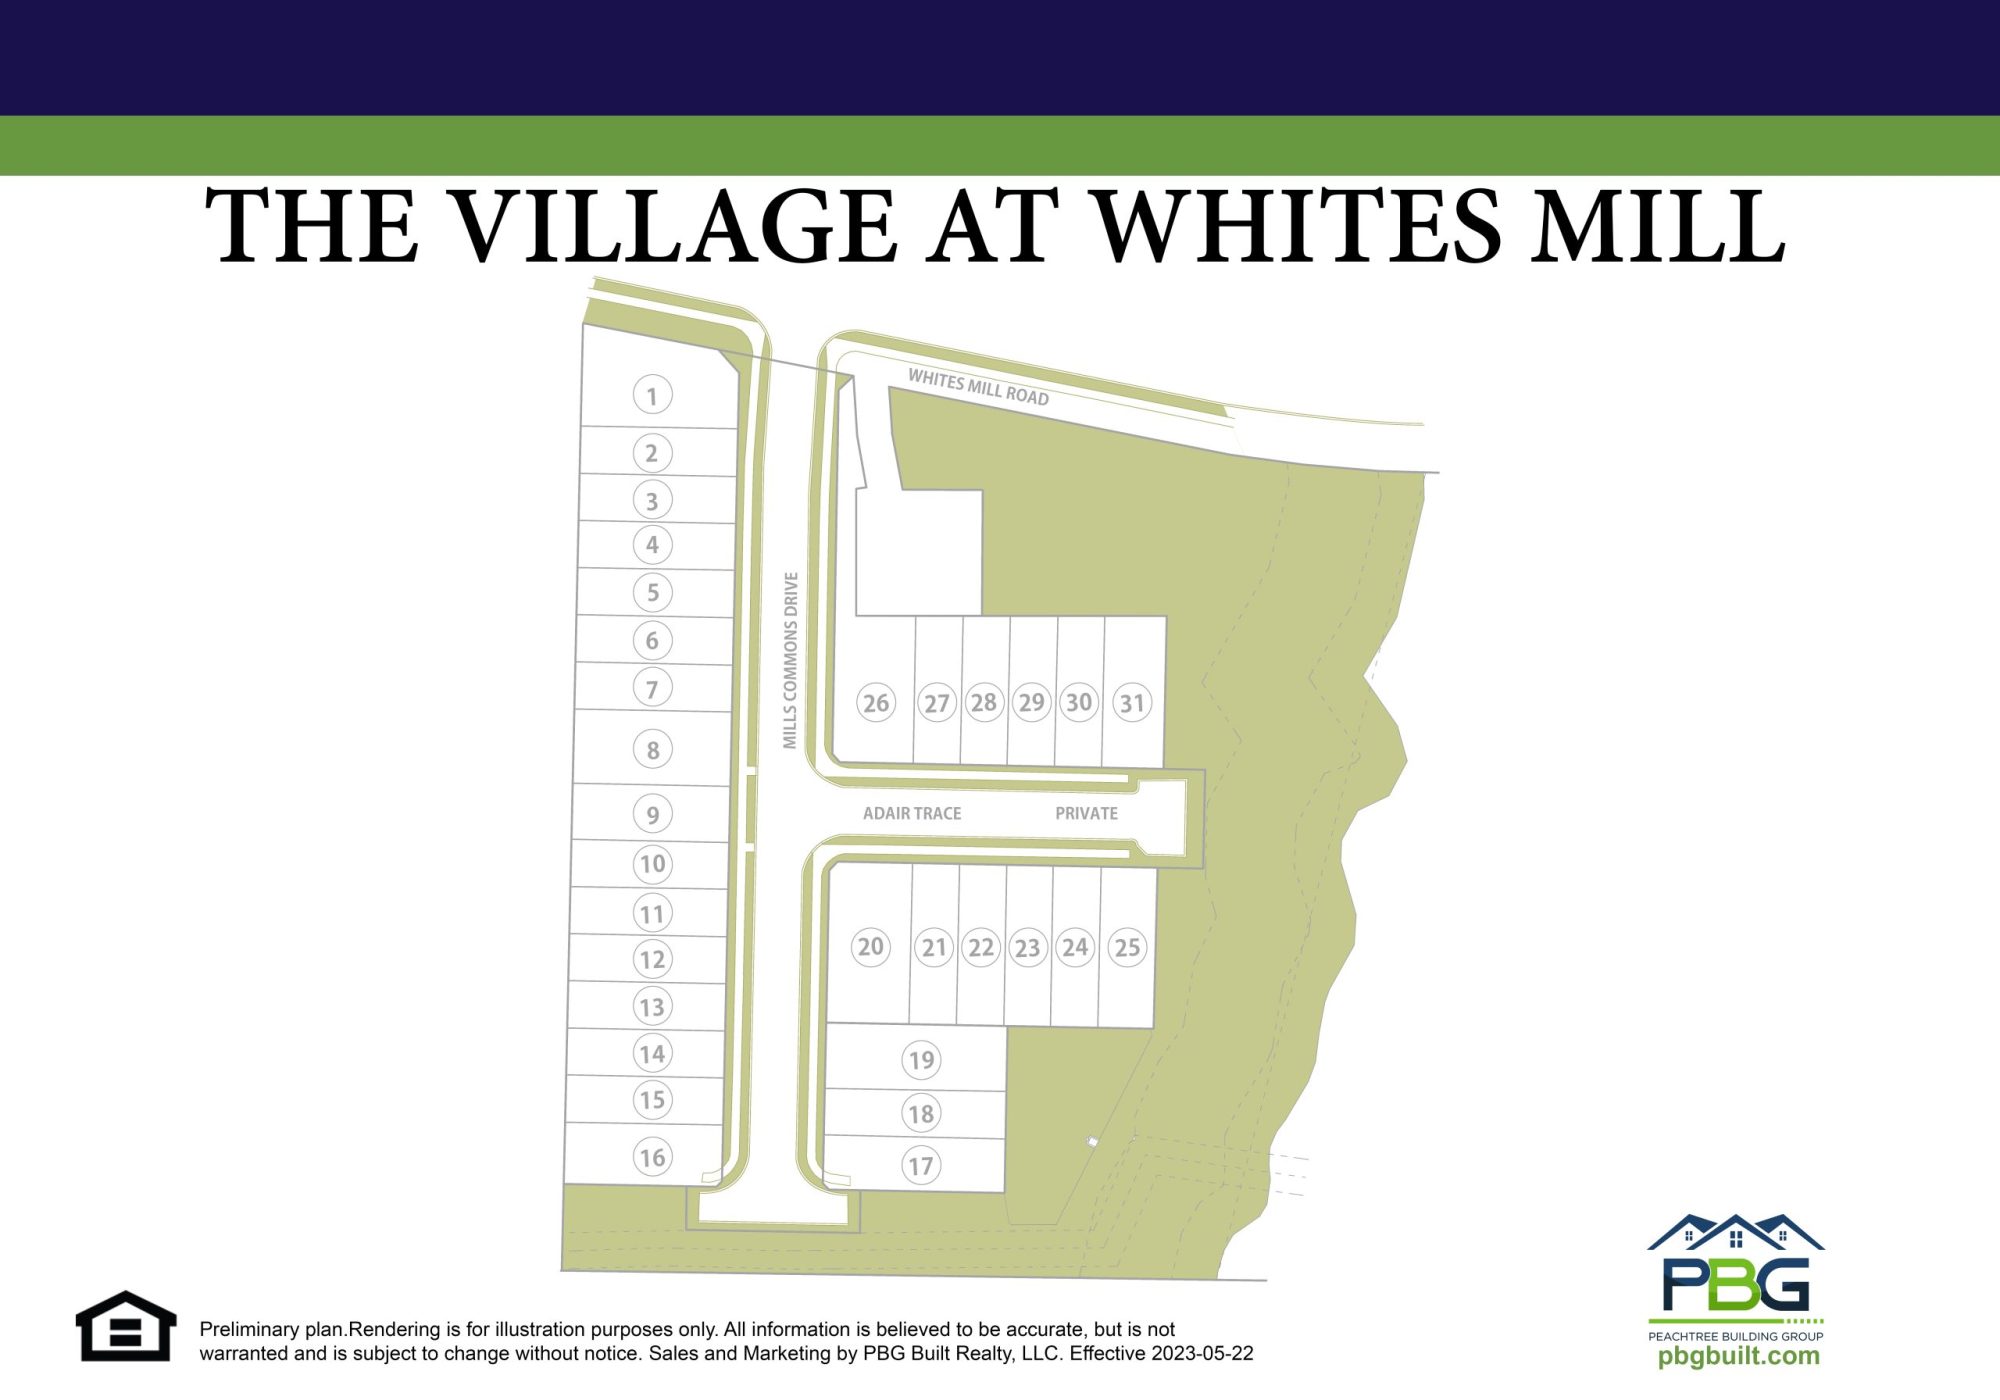 The Villages at Whites Mill